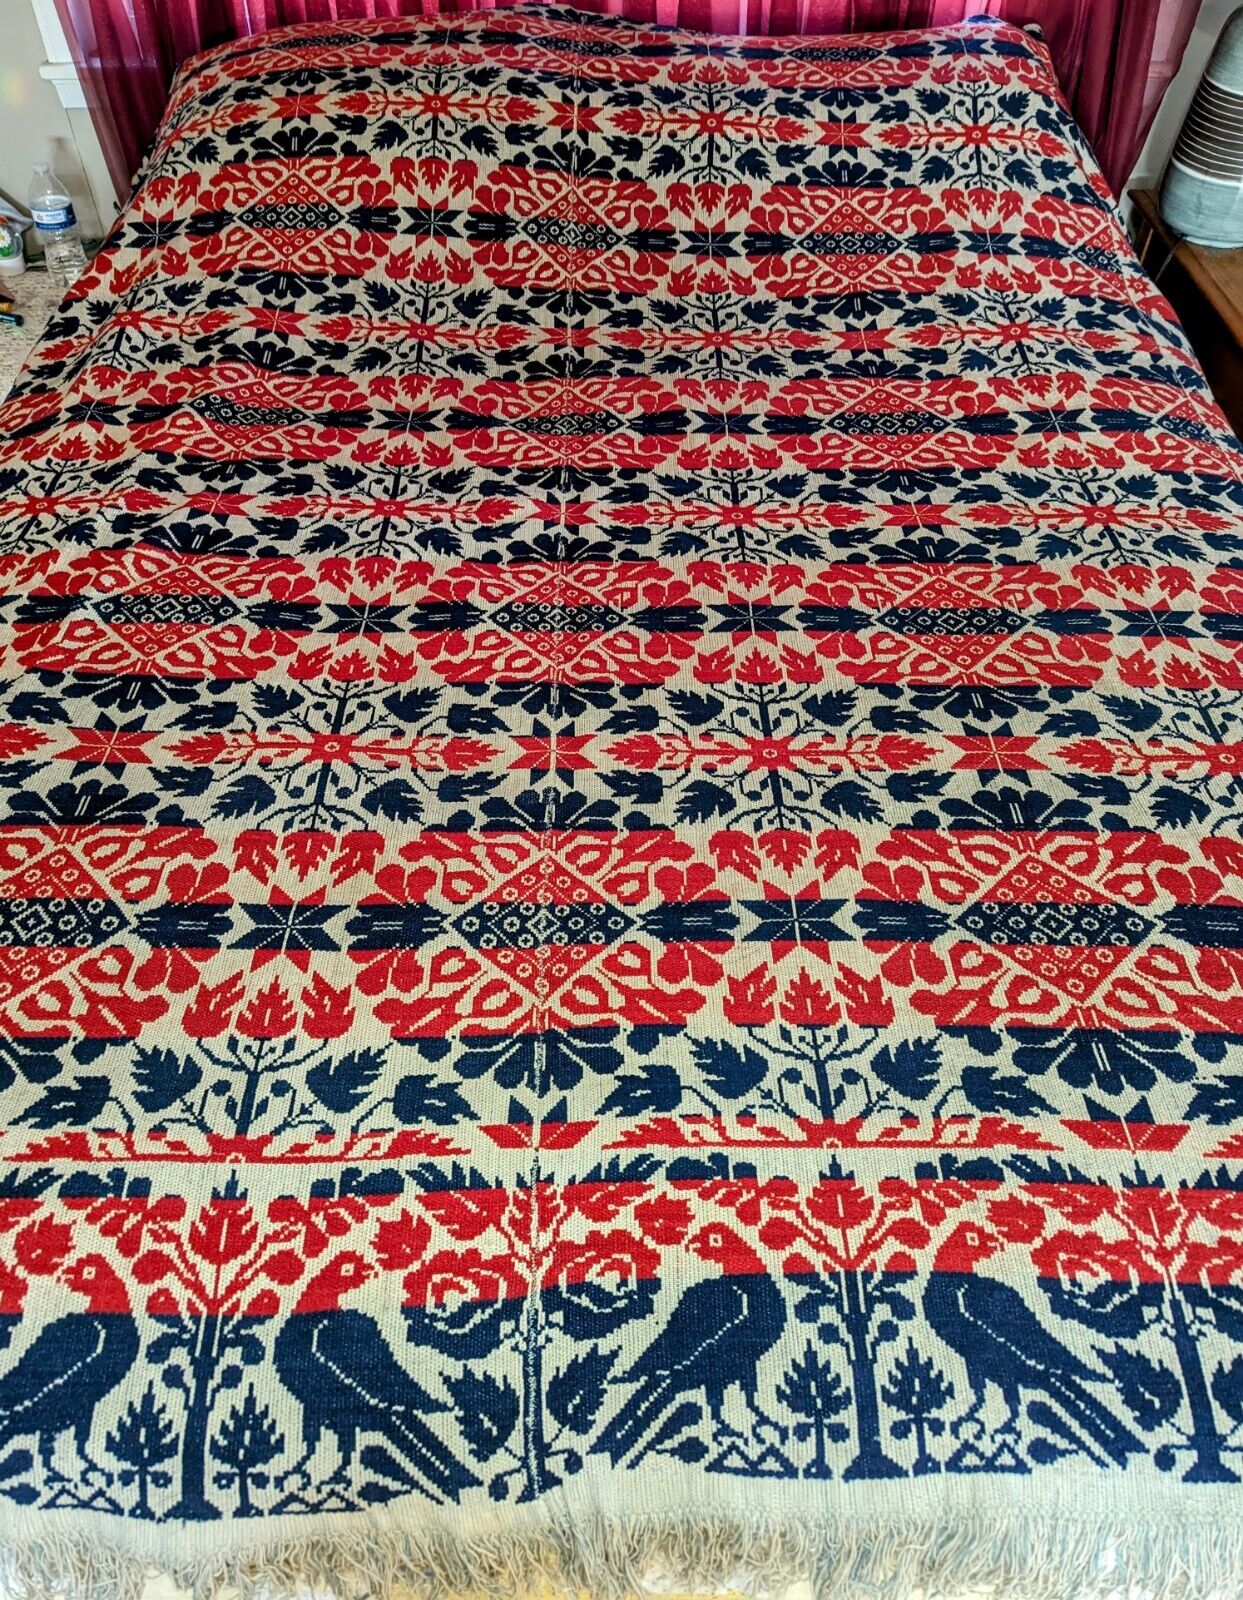 Antique 1853 Signed Jacquard Loom Wool Coverlet PA Dutch